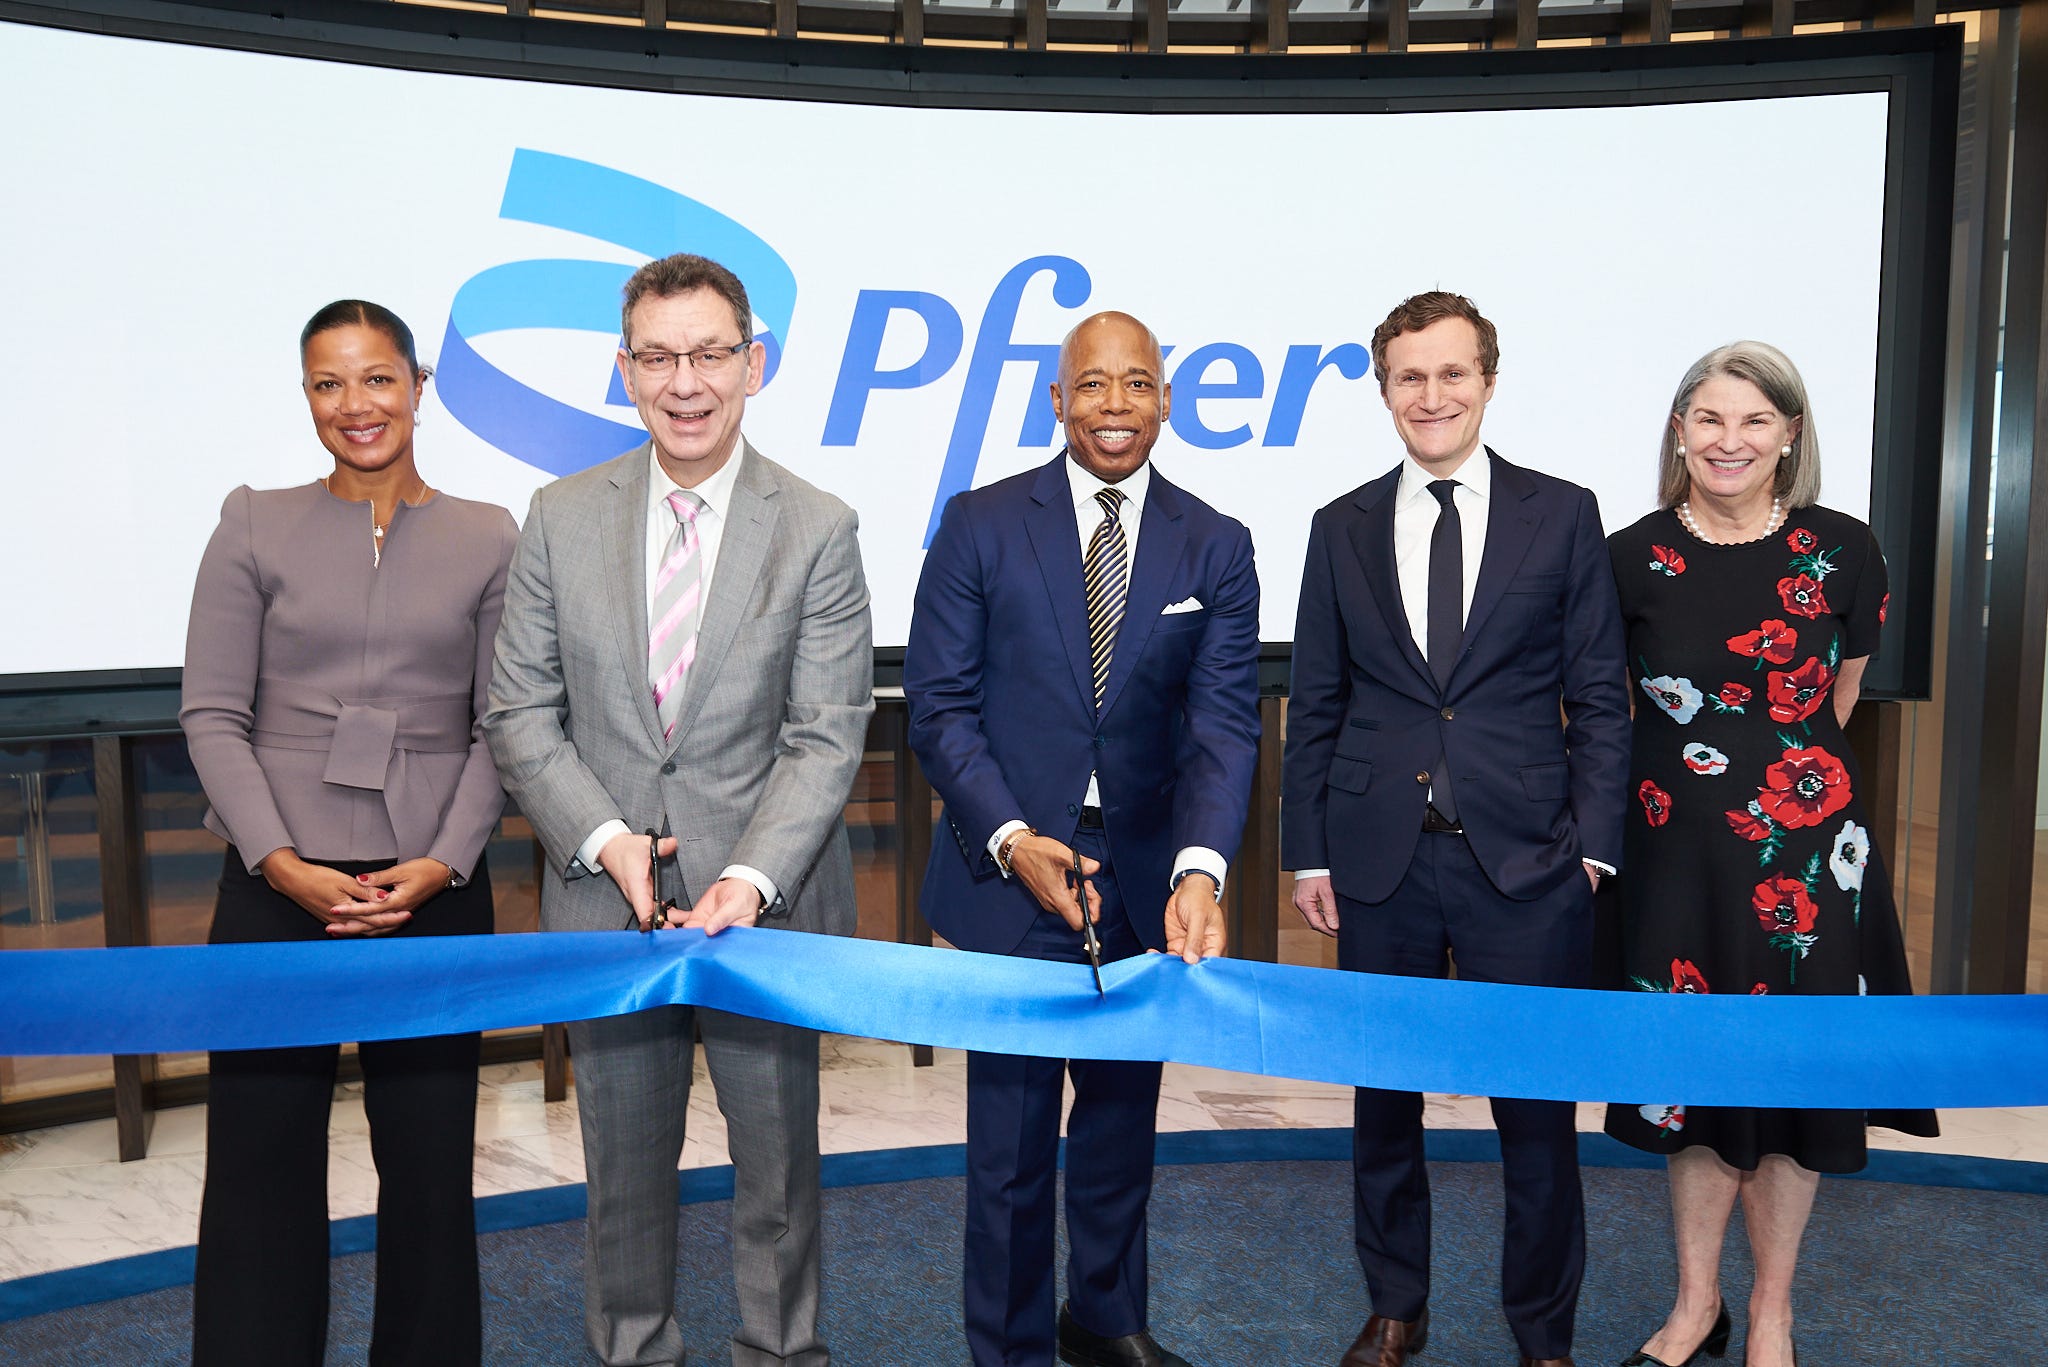 Pfizer Inc. on X: "We moved! We unveiled our new global headquarters 🏢 in  Hudson Yards. @NYCMayor Adams, our CEO @AlbertBourla & other leaders  participated in a ribbon cutting ceremony ✂️. Learn